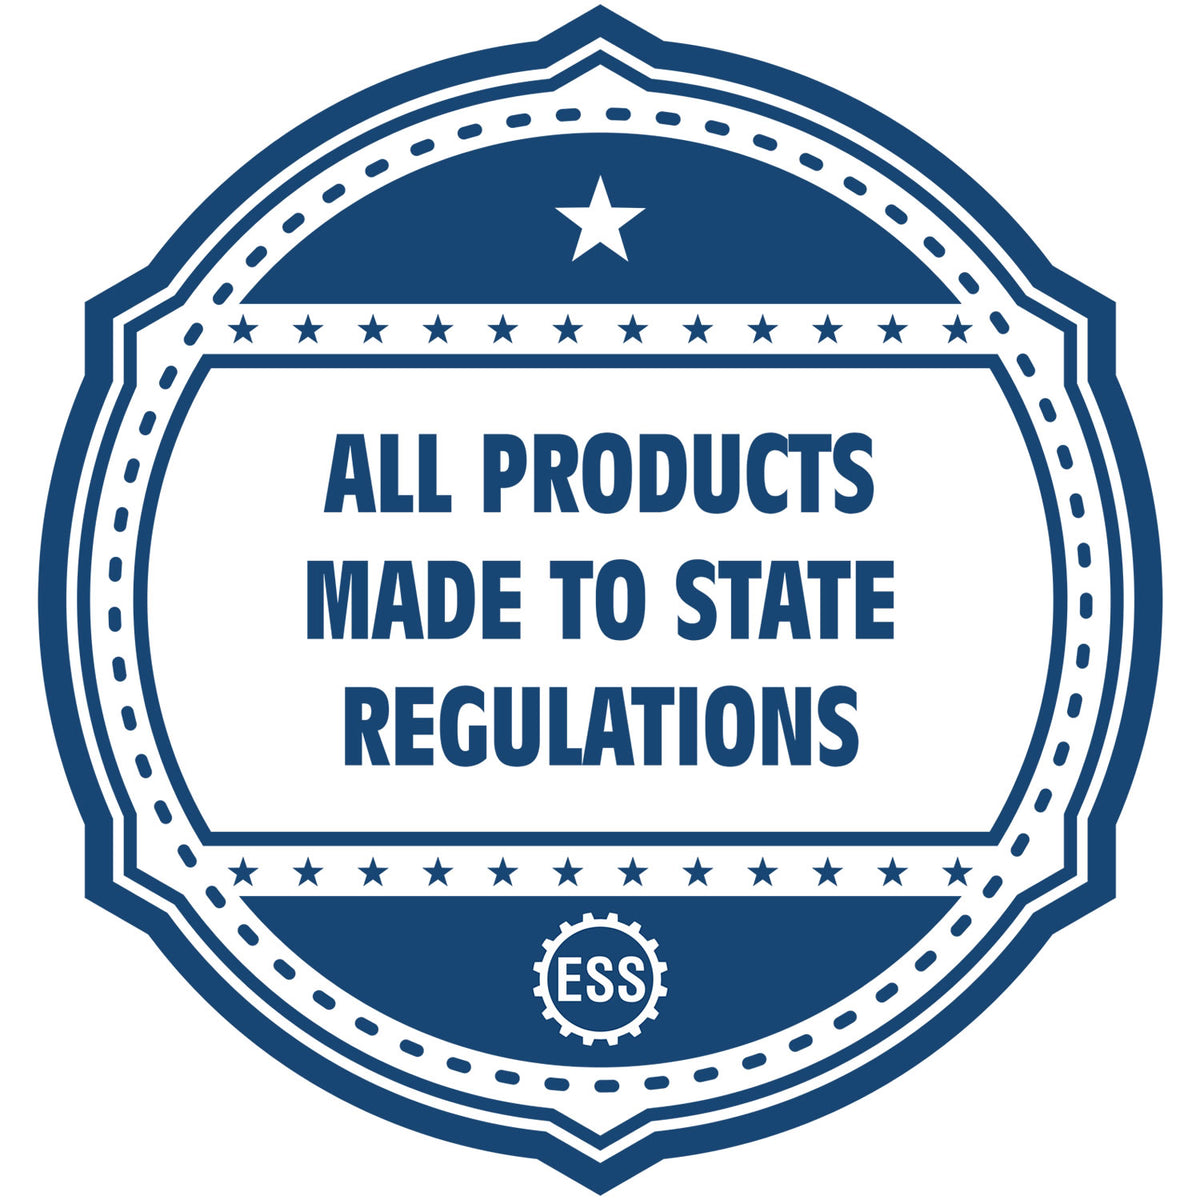 An icon or badge element for the Slim Pre-Inked Mississippi Land Surveyor Seal Stamp showing that this product is made in compliance with state regulations.